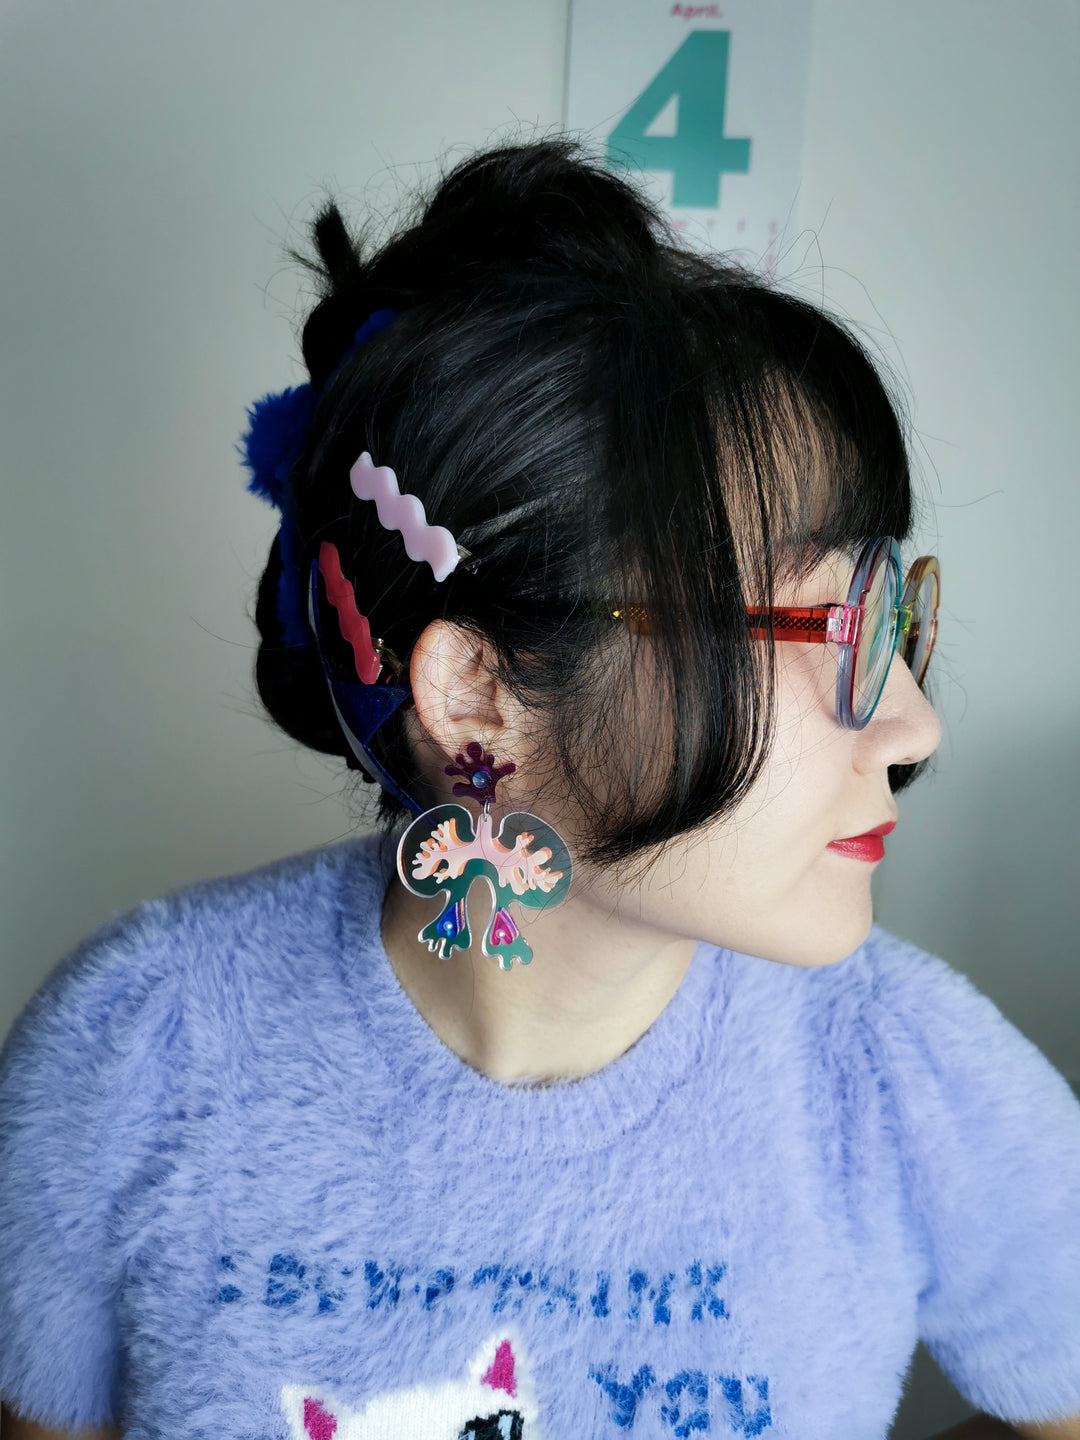 Colorful lung bowtie earring & pendant